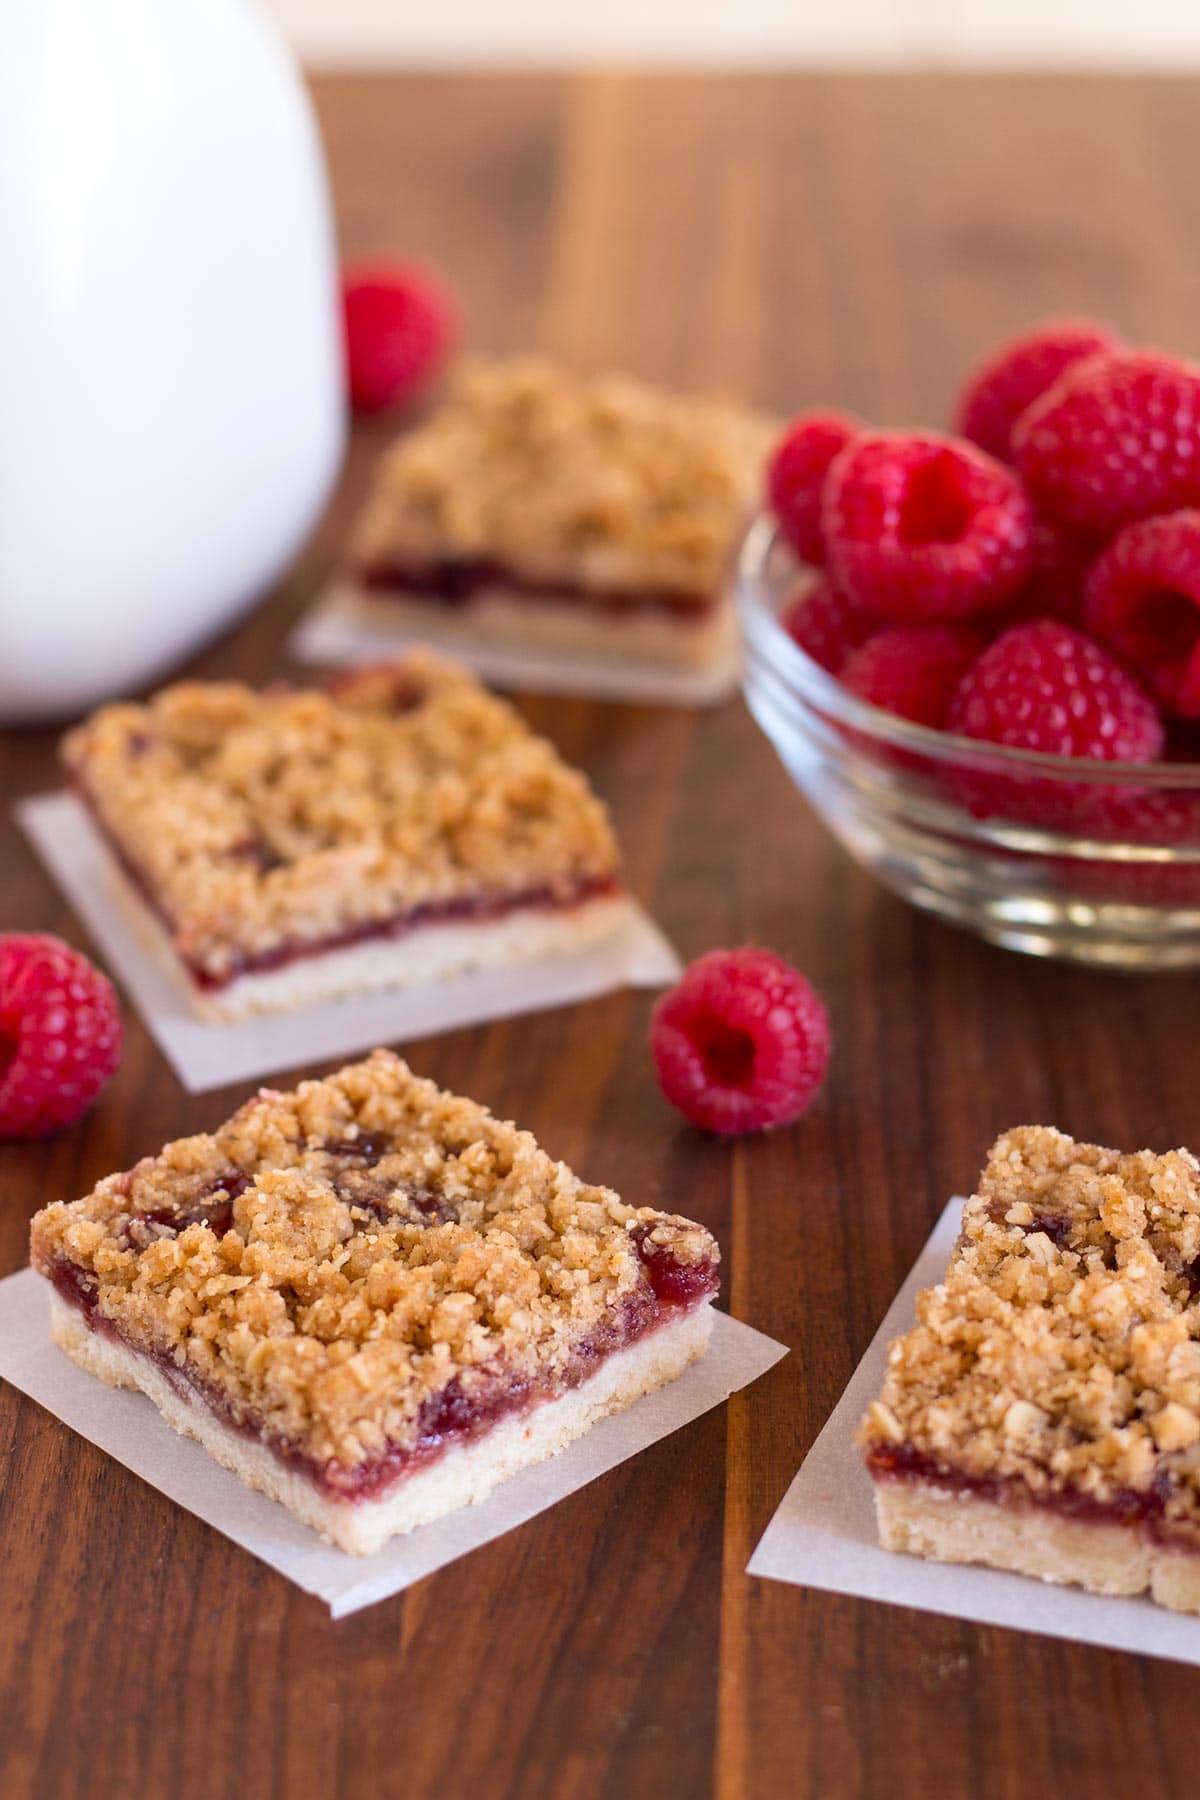 Butter crumble oat topping on raspberry bars.